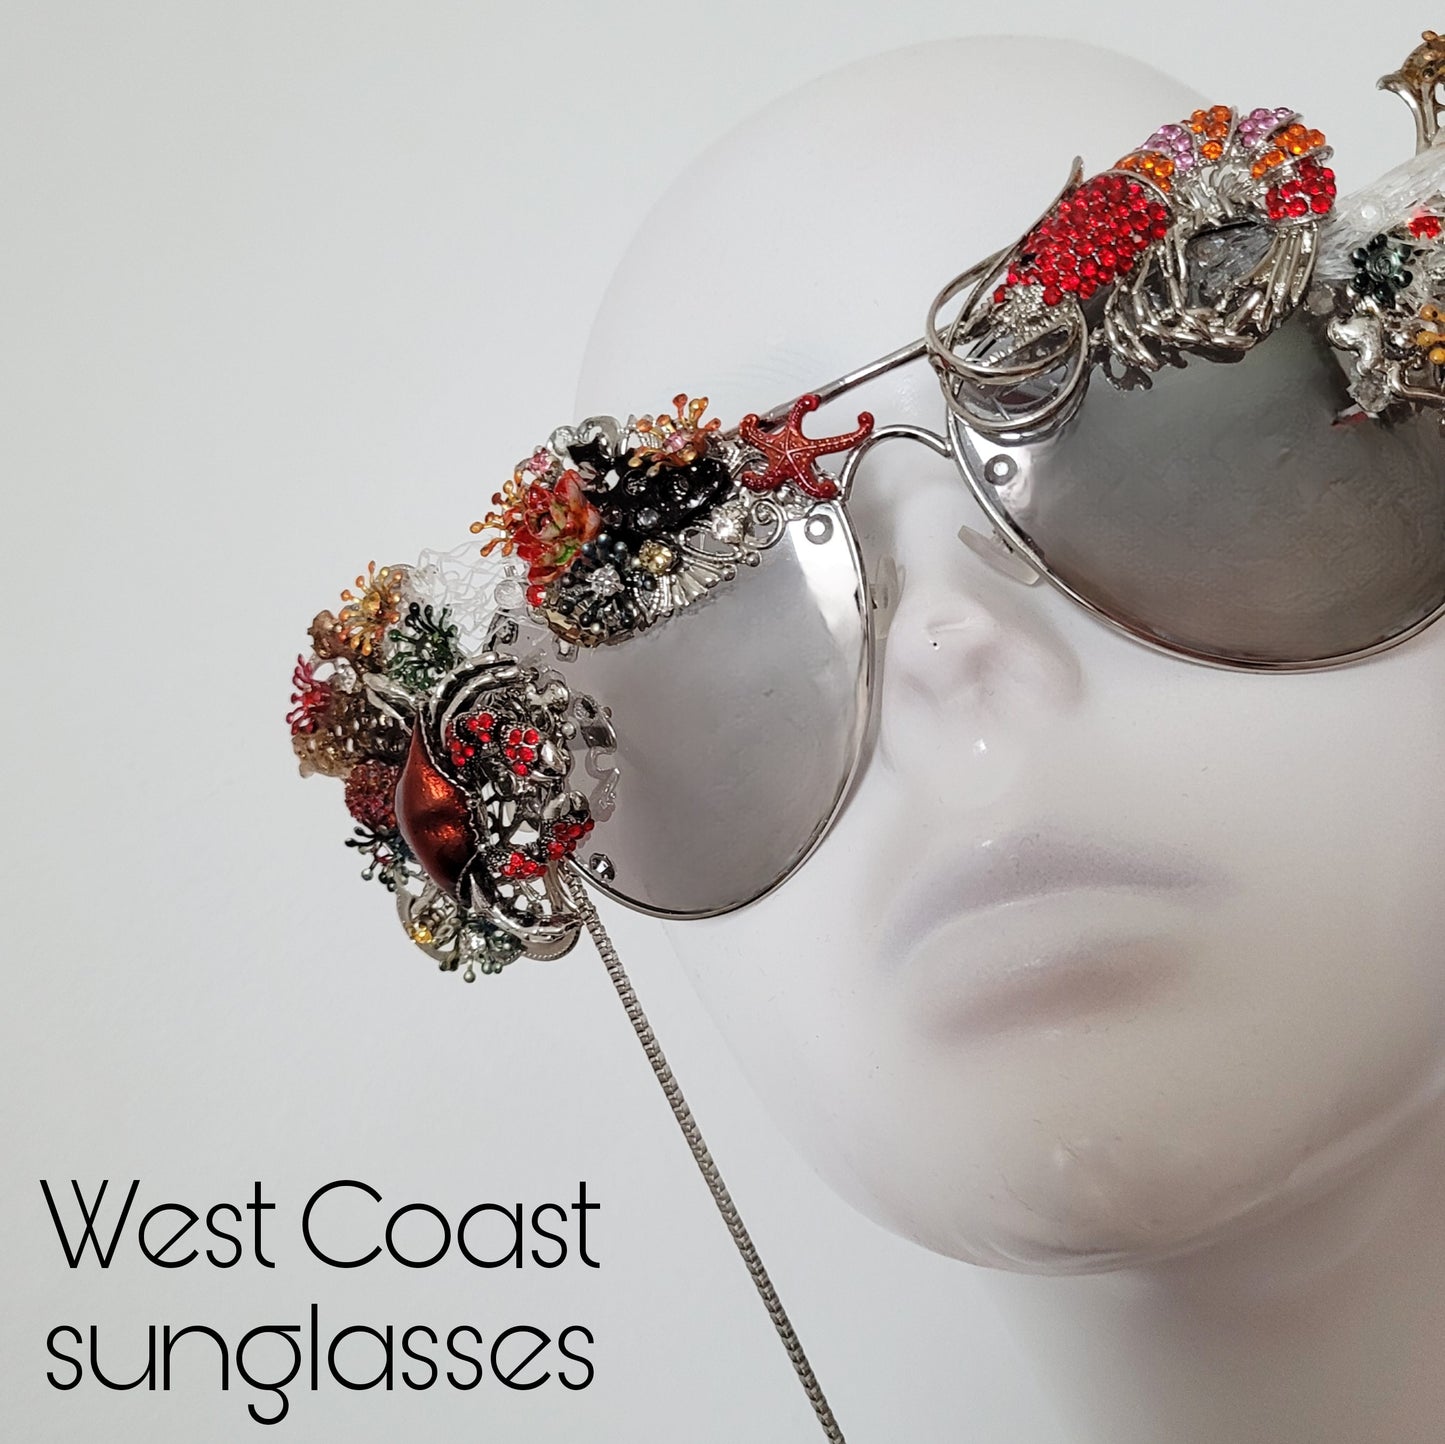 Shifting Depths collection: the West Coast showpiece sunglasses